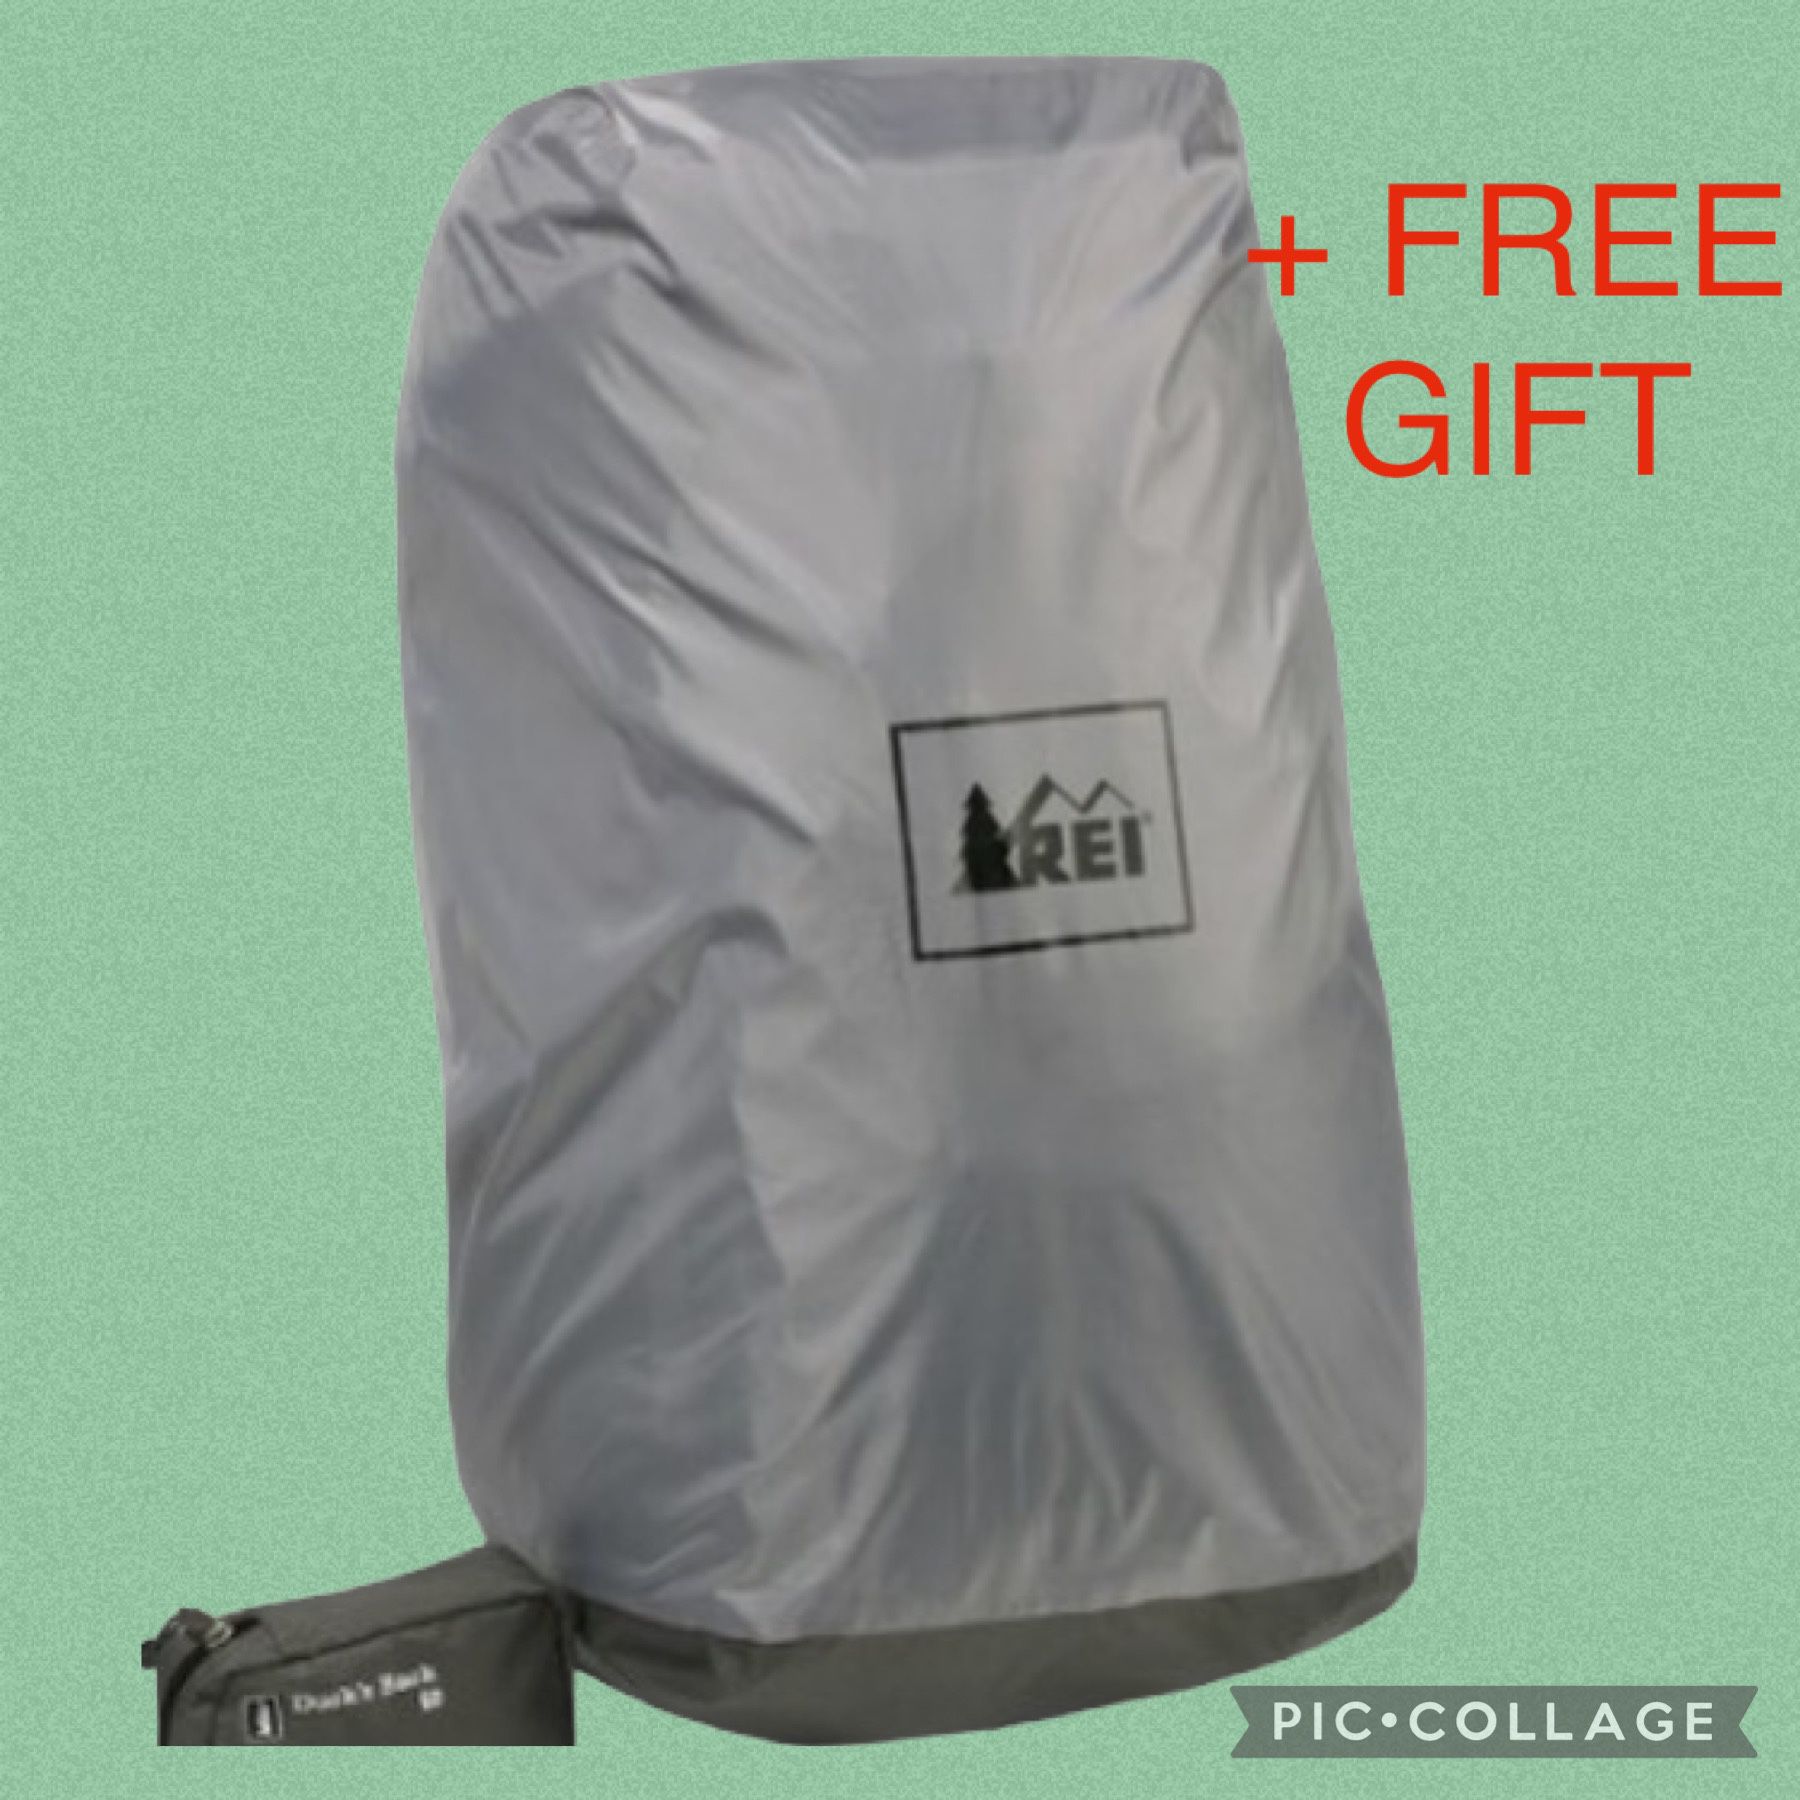 *NEW* REI Duck’s Back / Rain Cover / Backpack Cover 60 Liters + FREE Camping Mess Kit